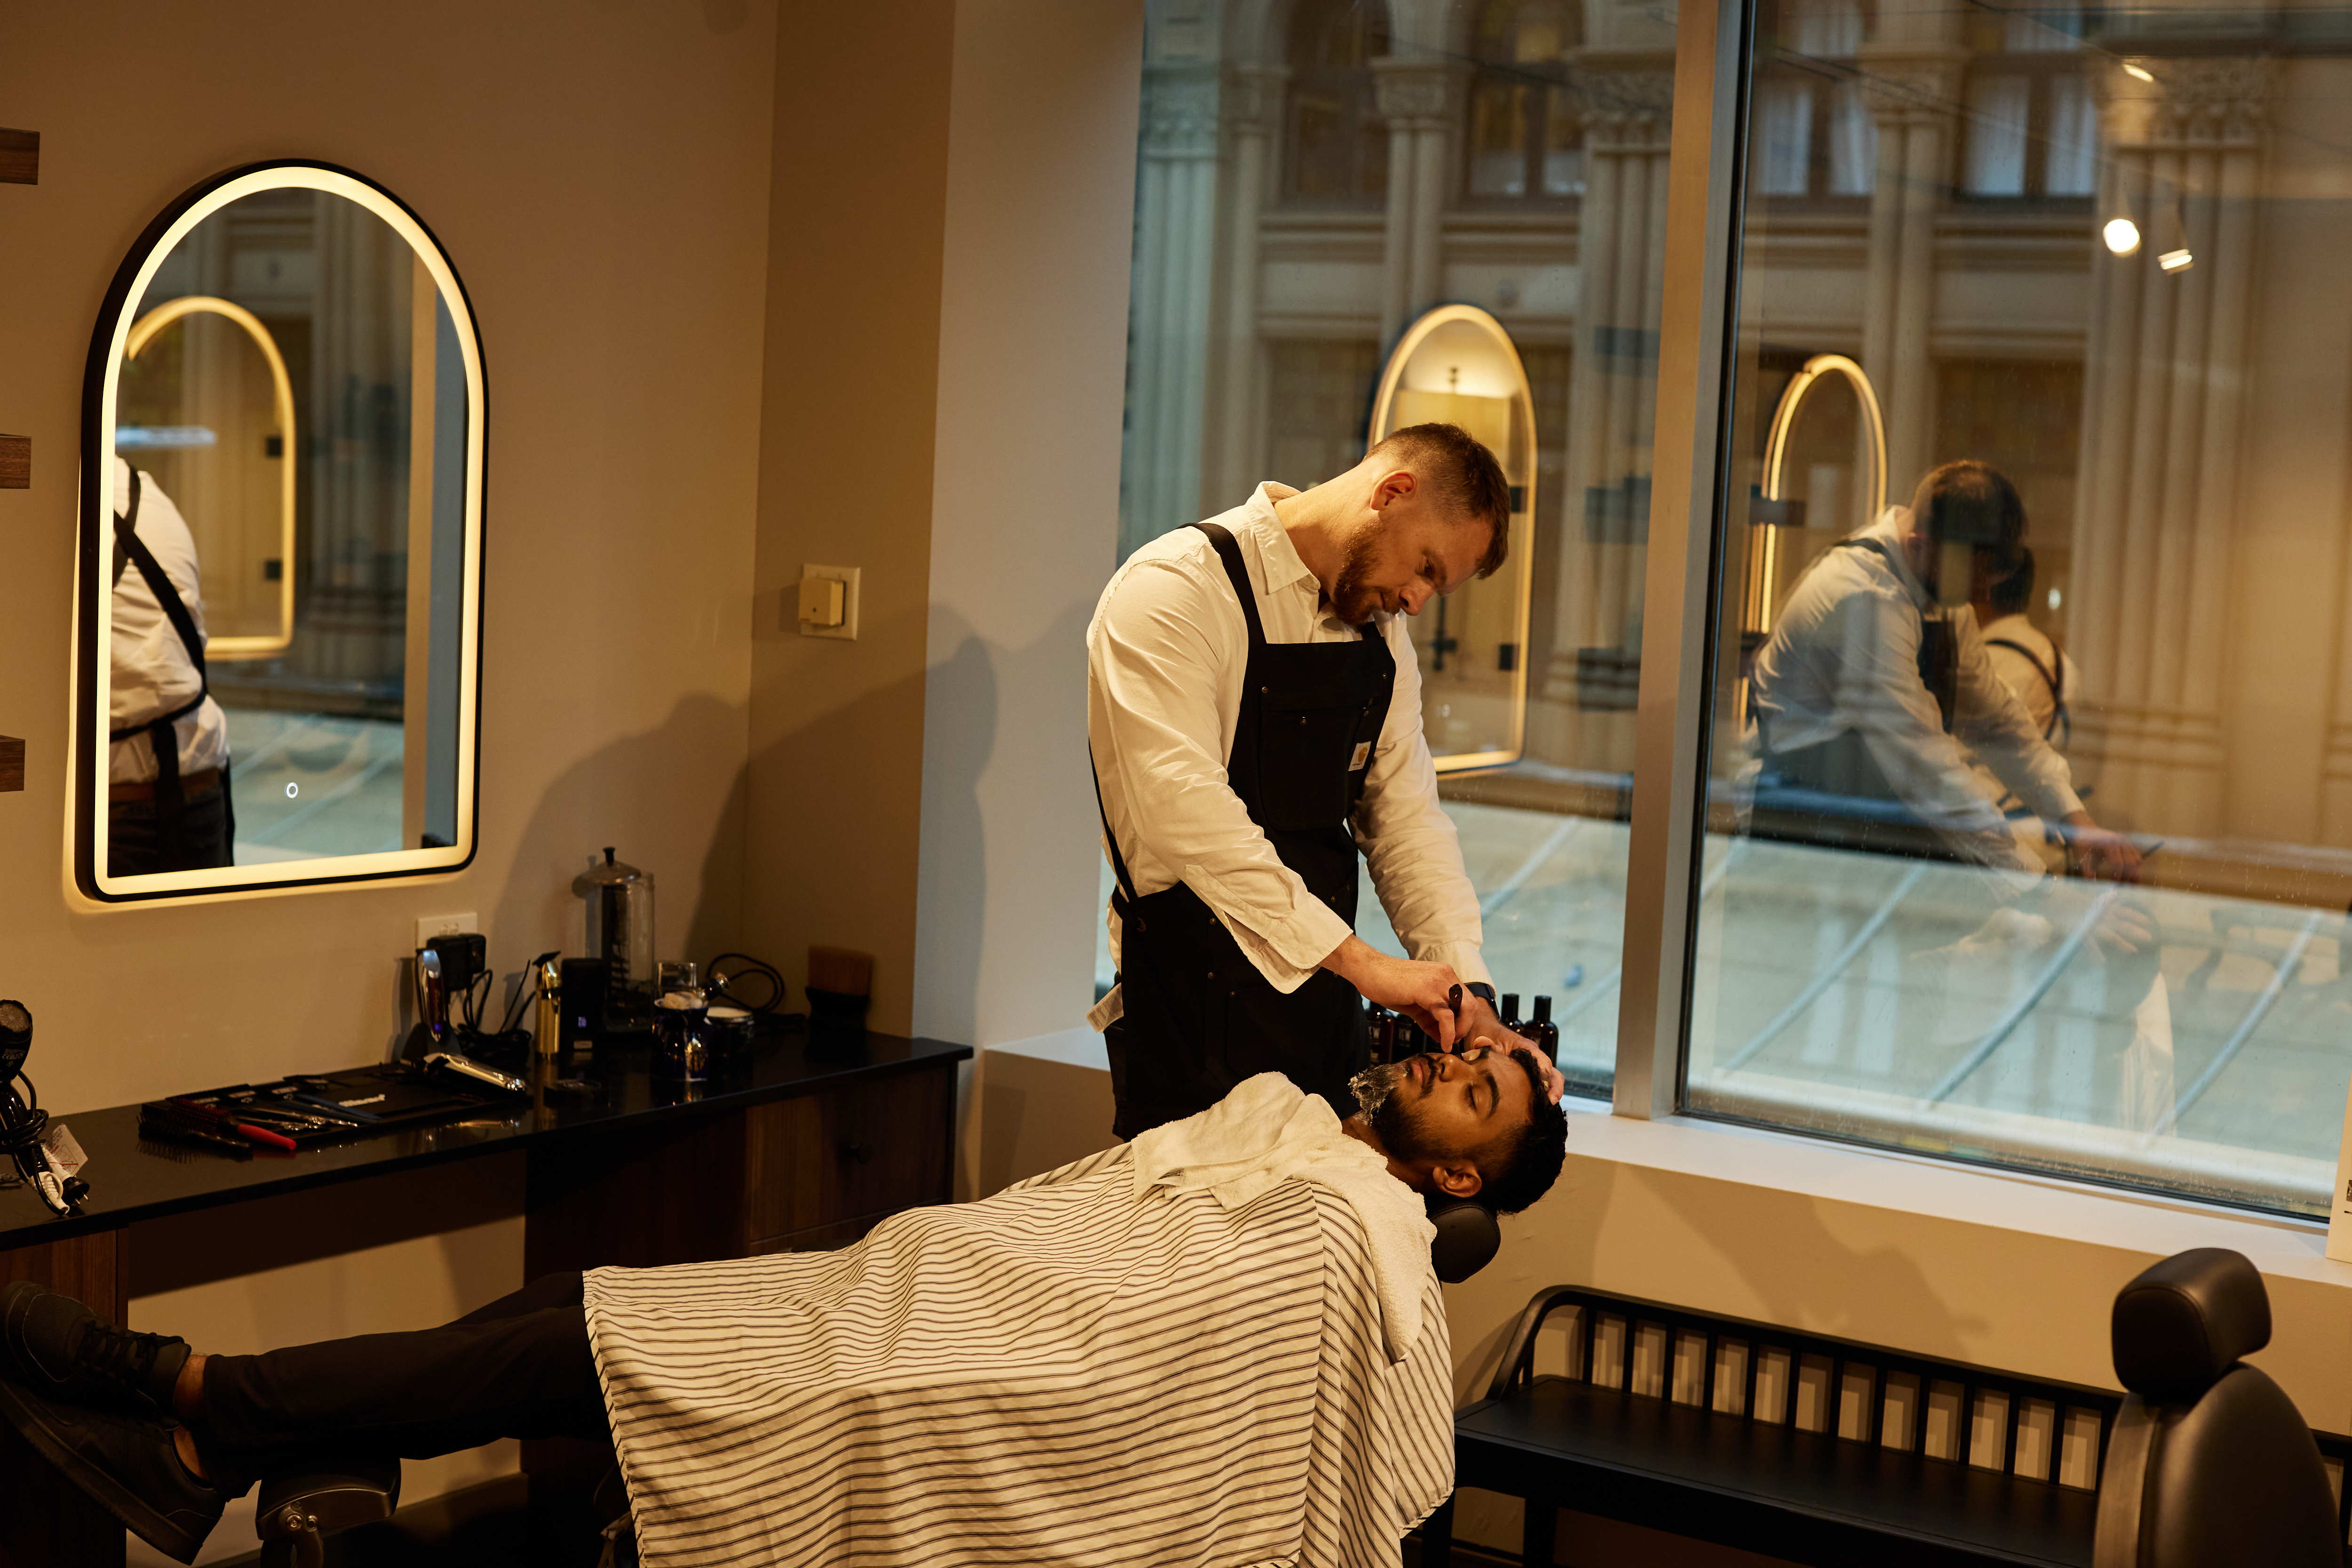 Sydney’s Premier Face of Man Marks a New Era of Luxury Grooming With Its Flagship City Location